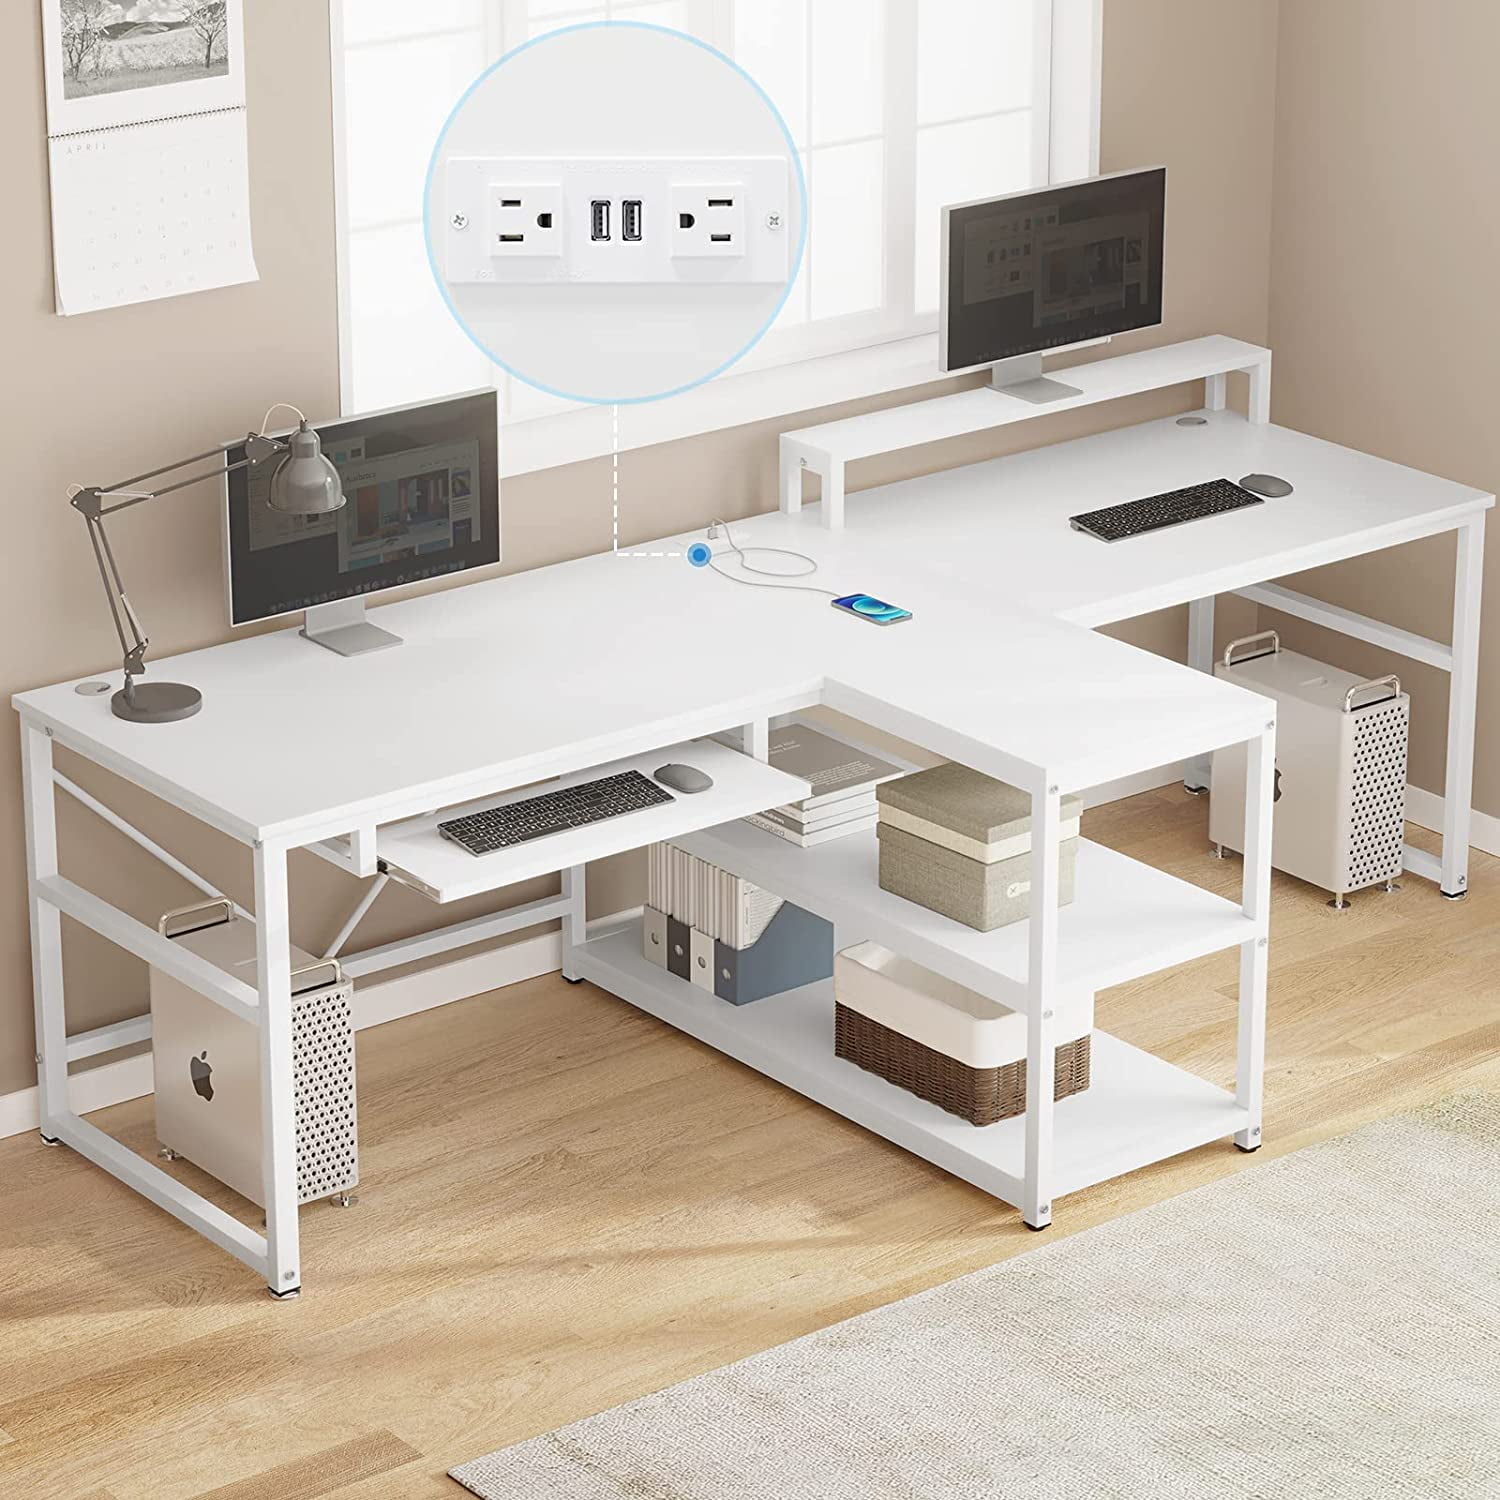 Viagdo 94.5 inches Computer Desk, Two Person Desk with Monitor Stand for Home Office, Power Strip with USB, White